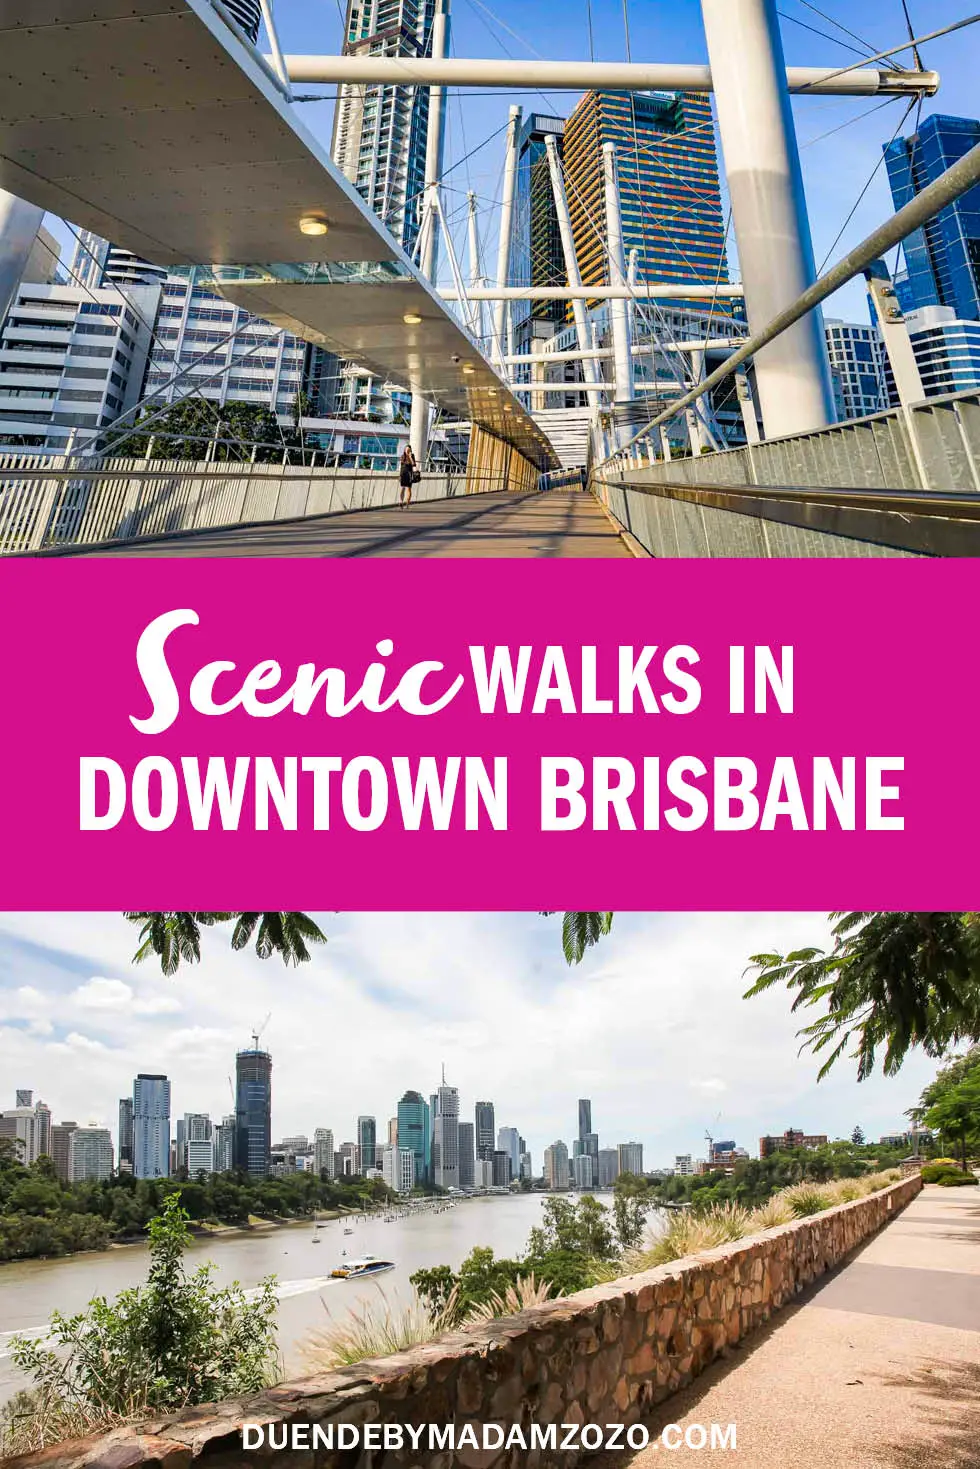 Images of Brisbane city with title: "Scenic walks in downtown Brisbane"